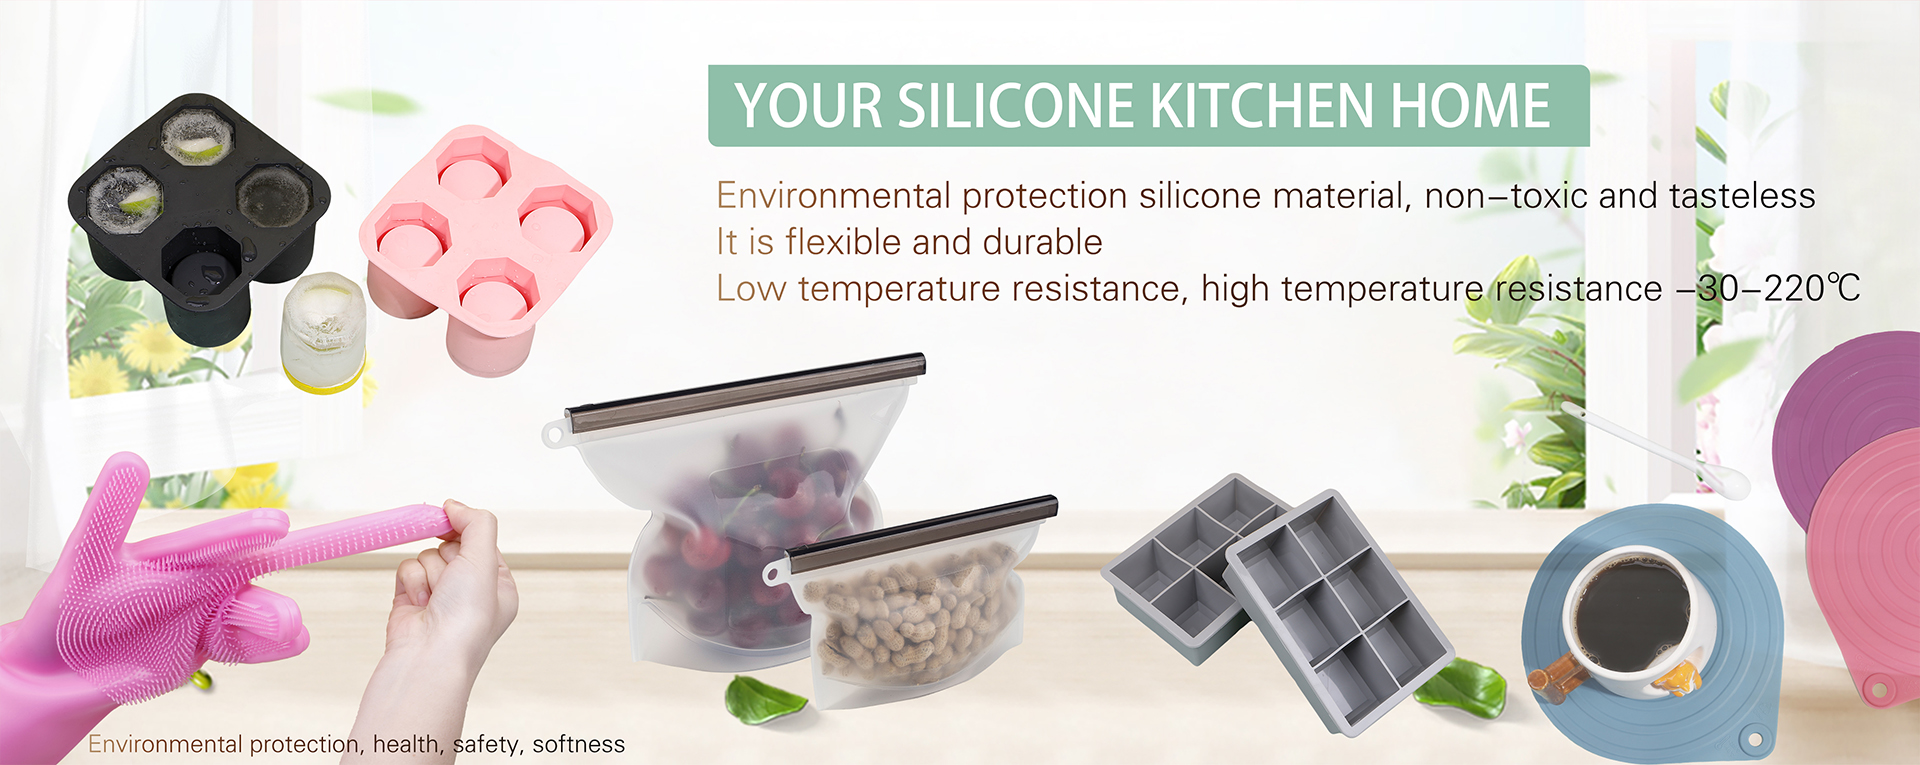 silicone kitchen products